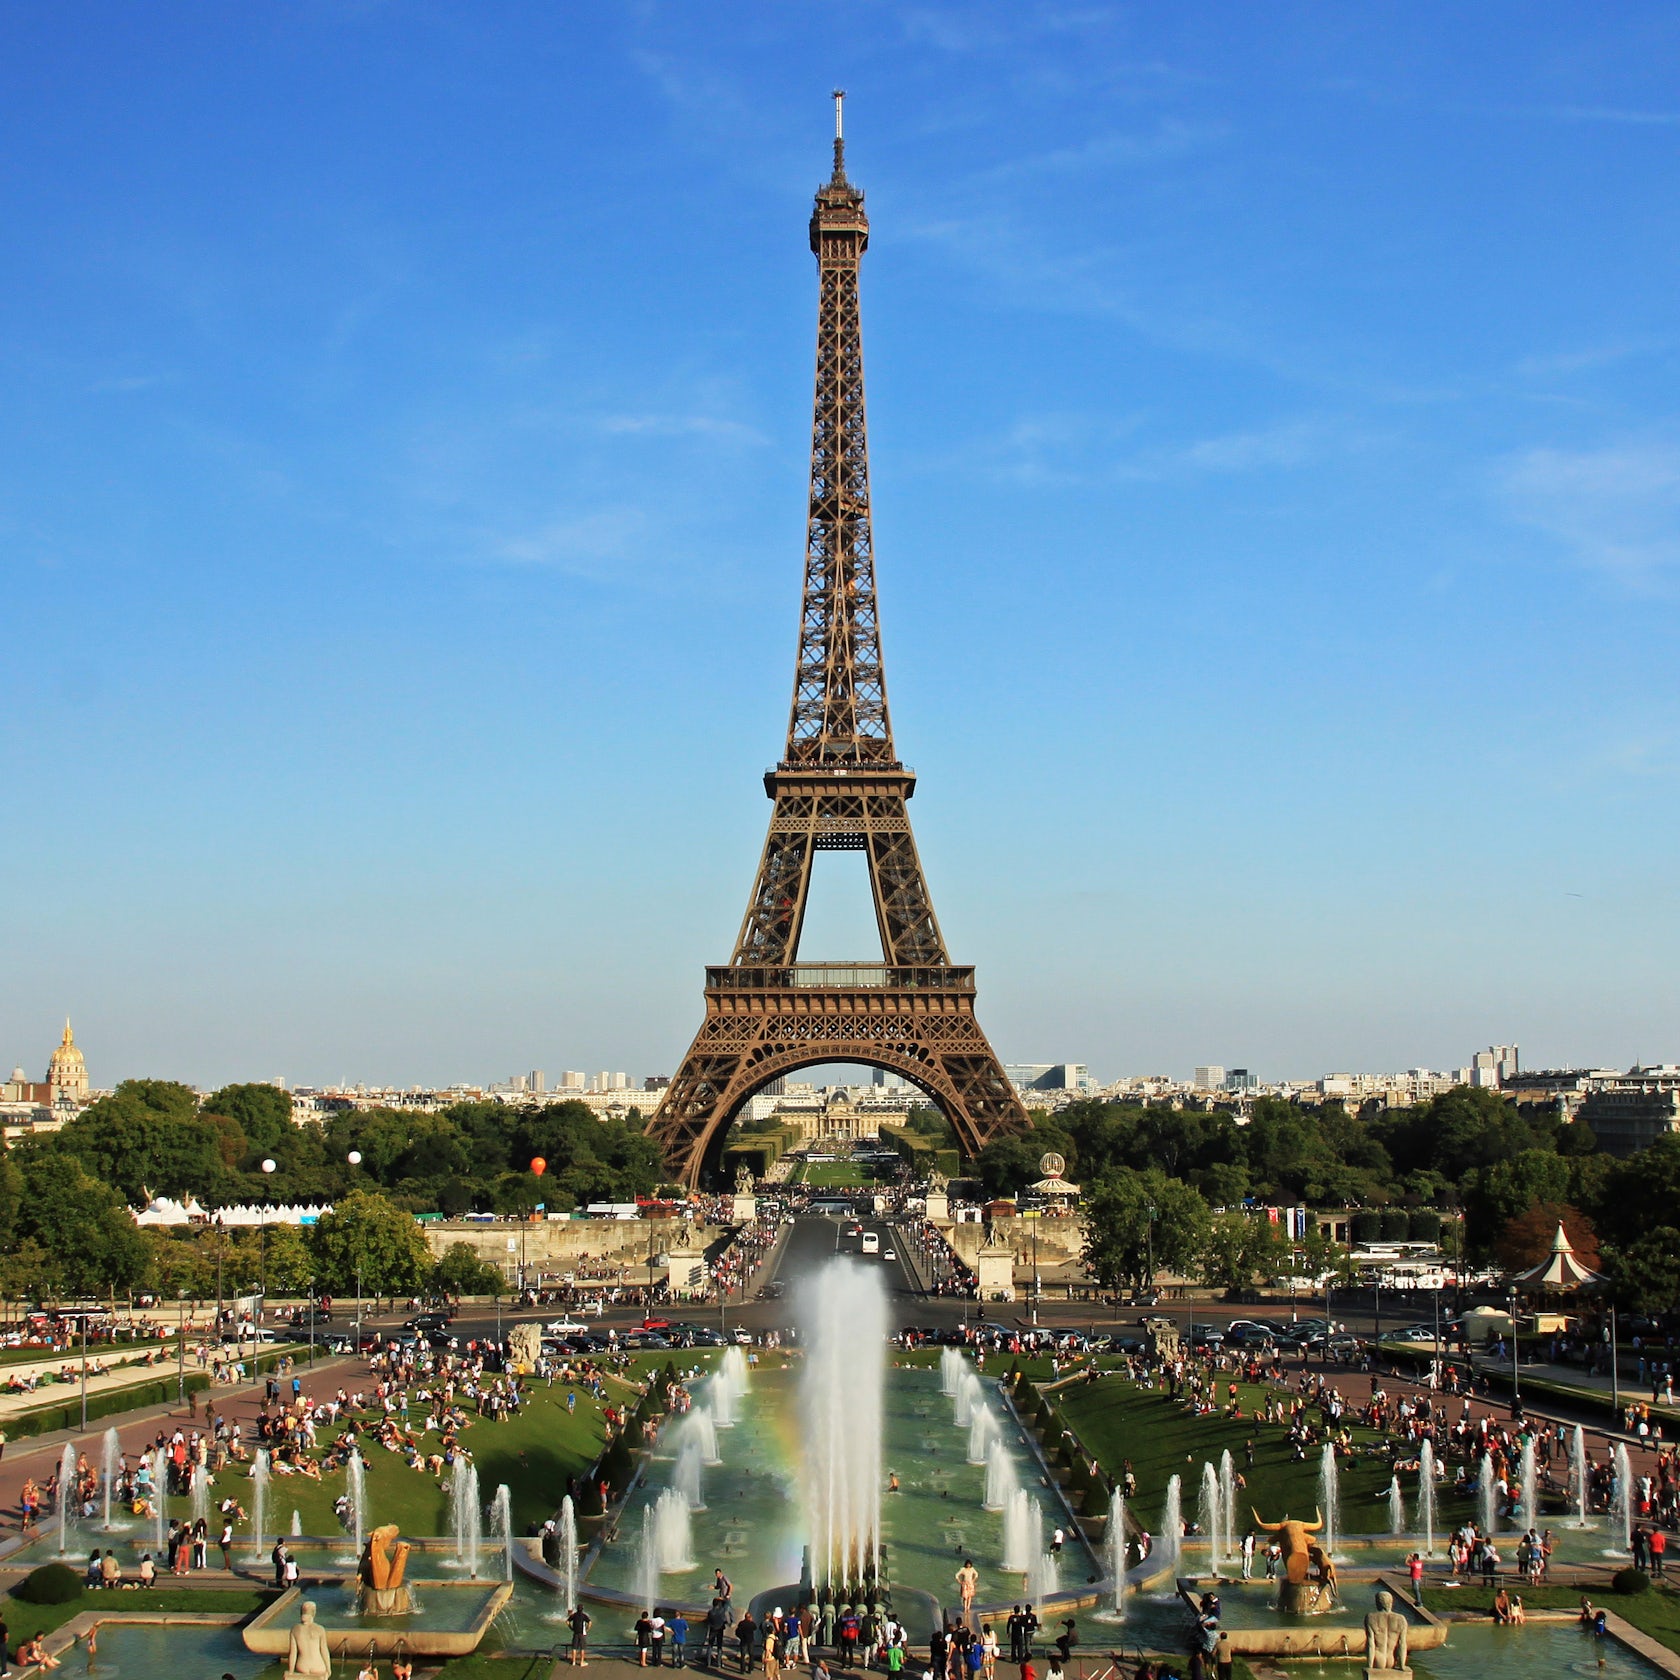 Closing of the summit in January - OFFICIAL Eiffel Tower website